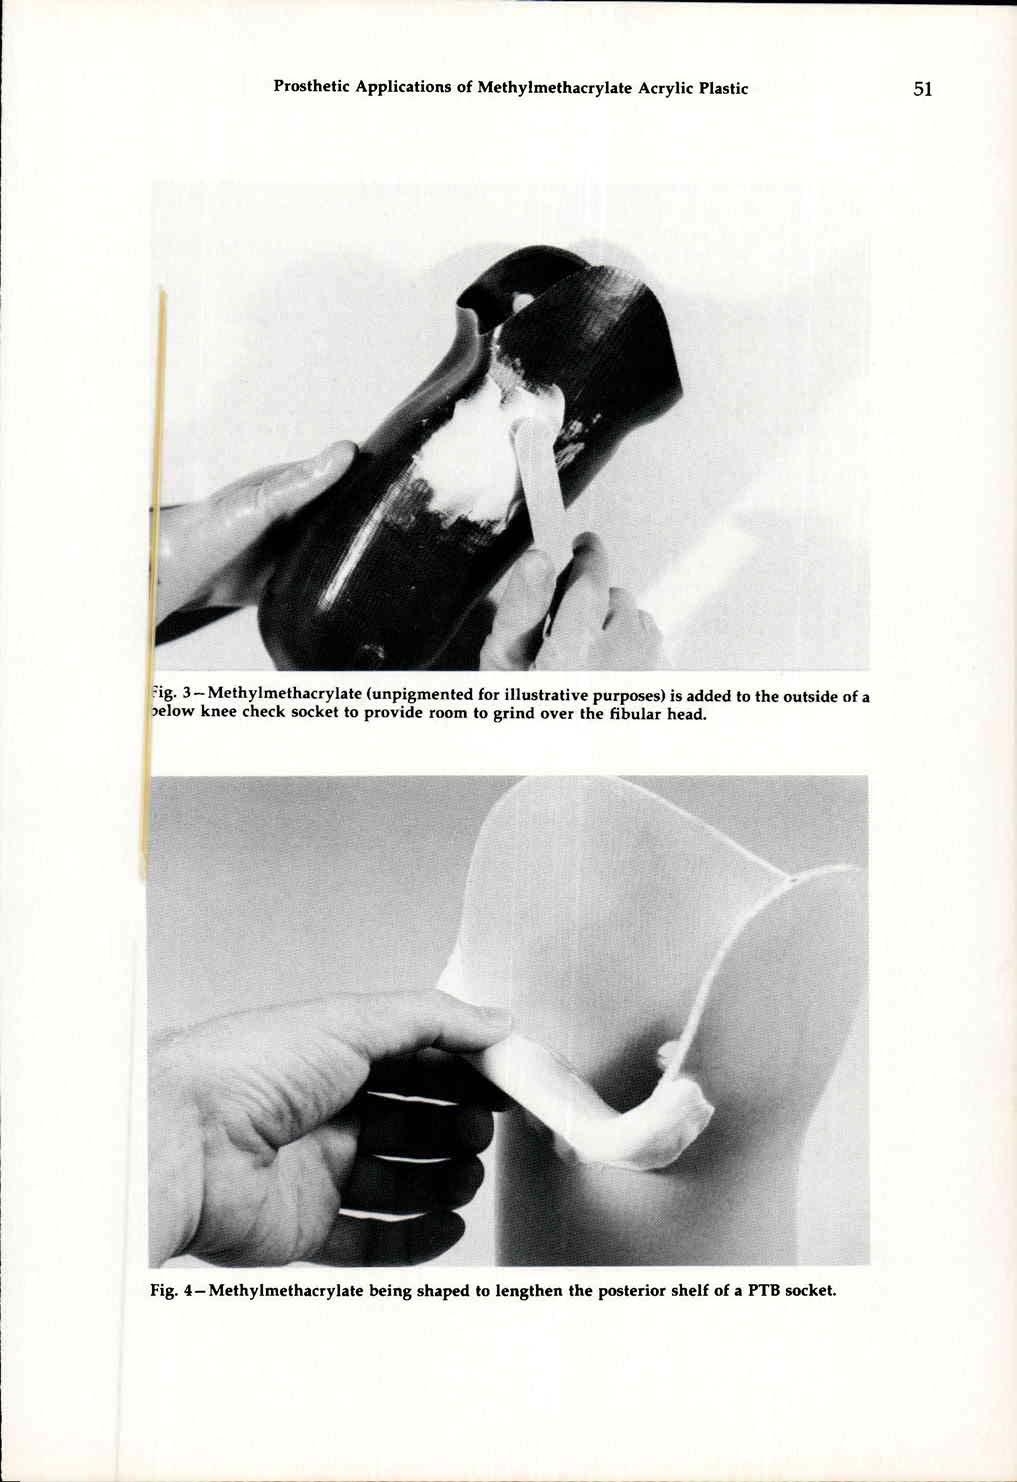 Fig. 3 - Methylmethacrylate (unpigmented for illustrative purposes) is added to the outside of a below knee check socket to